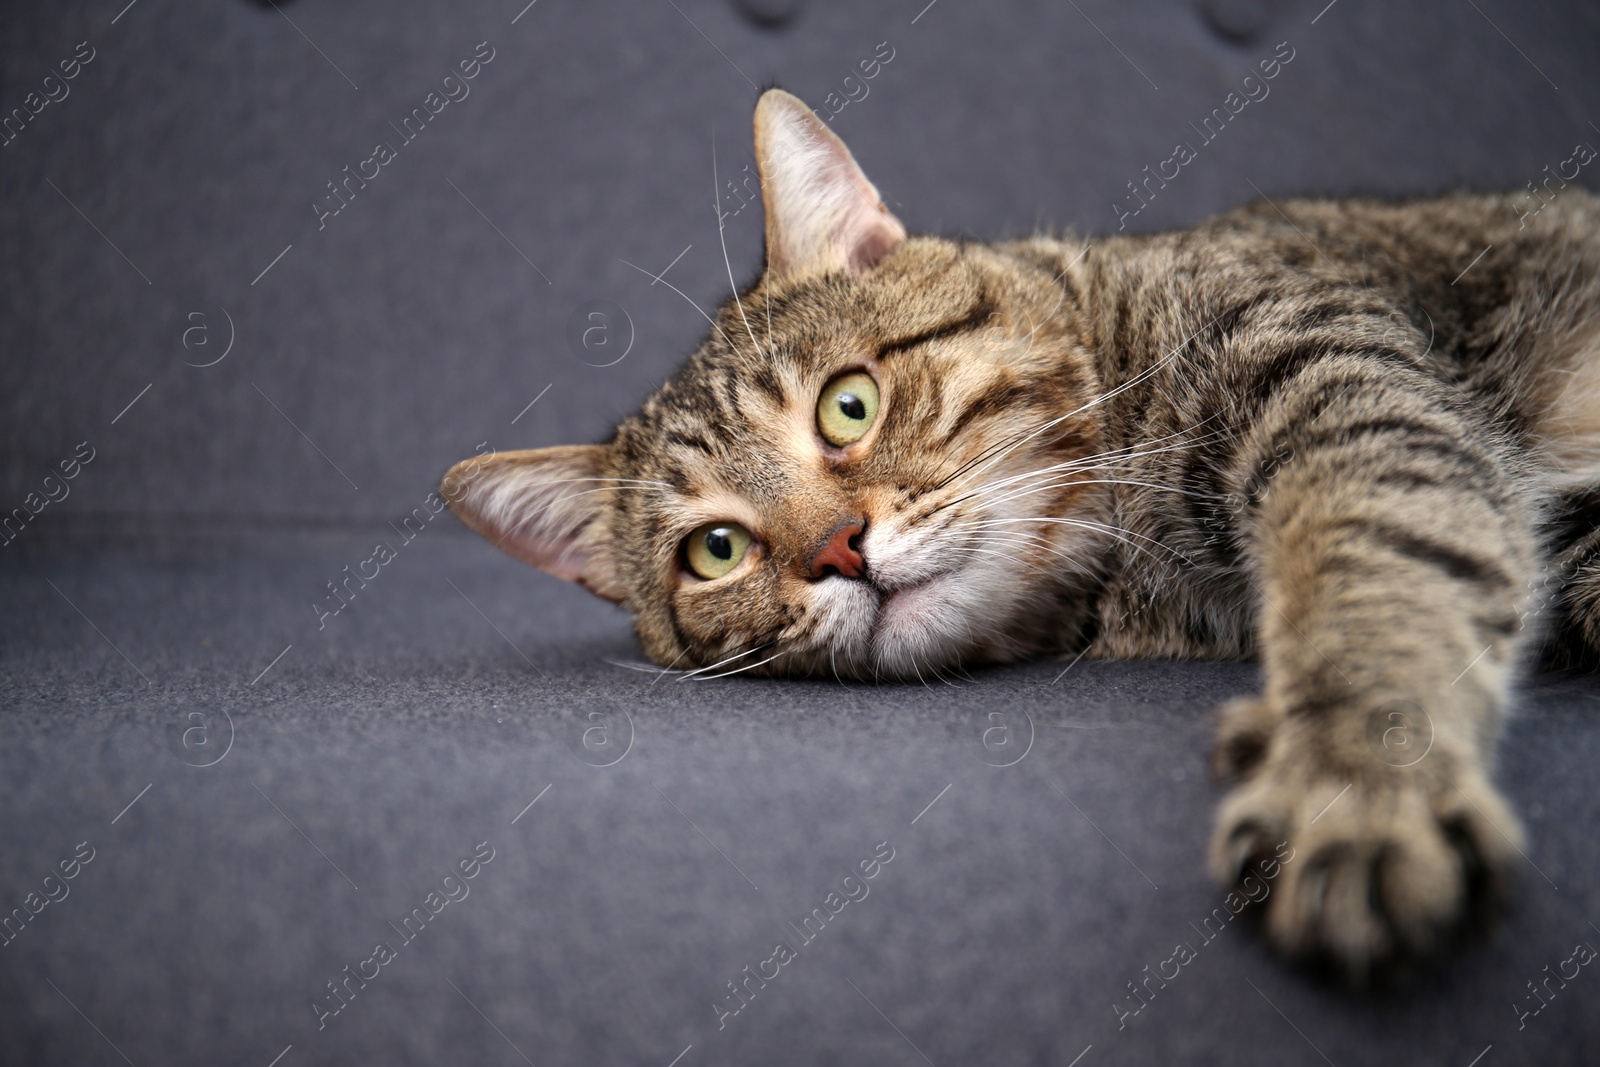 Photo of Cute cat resting on sofa at home